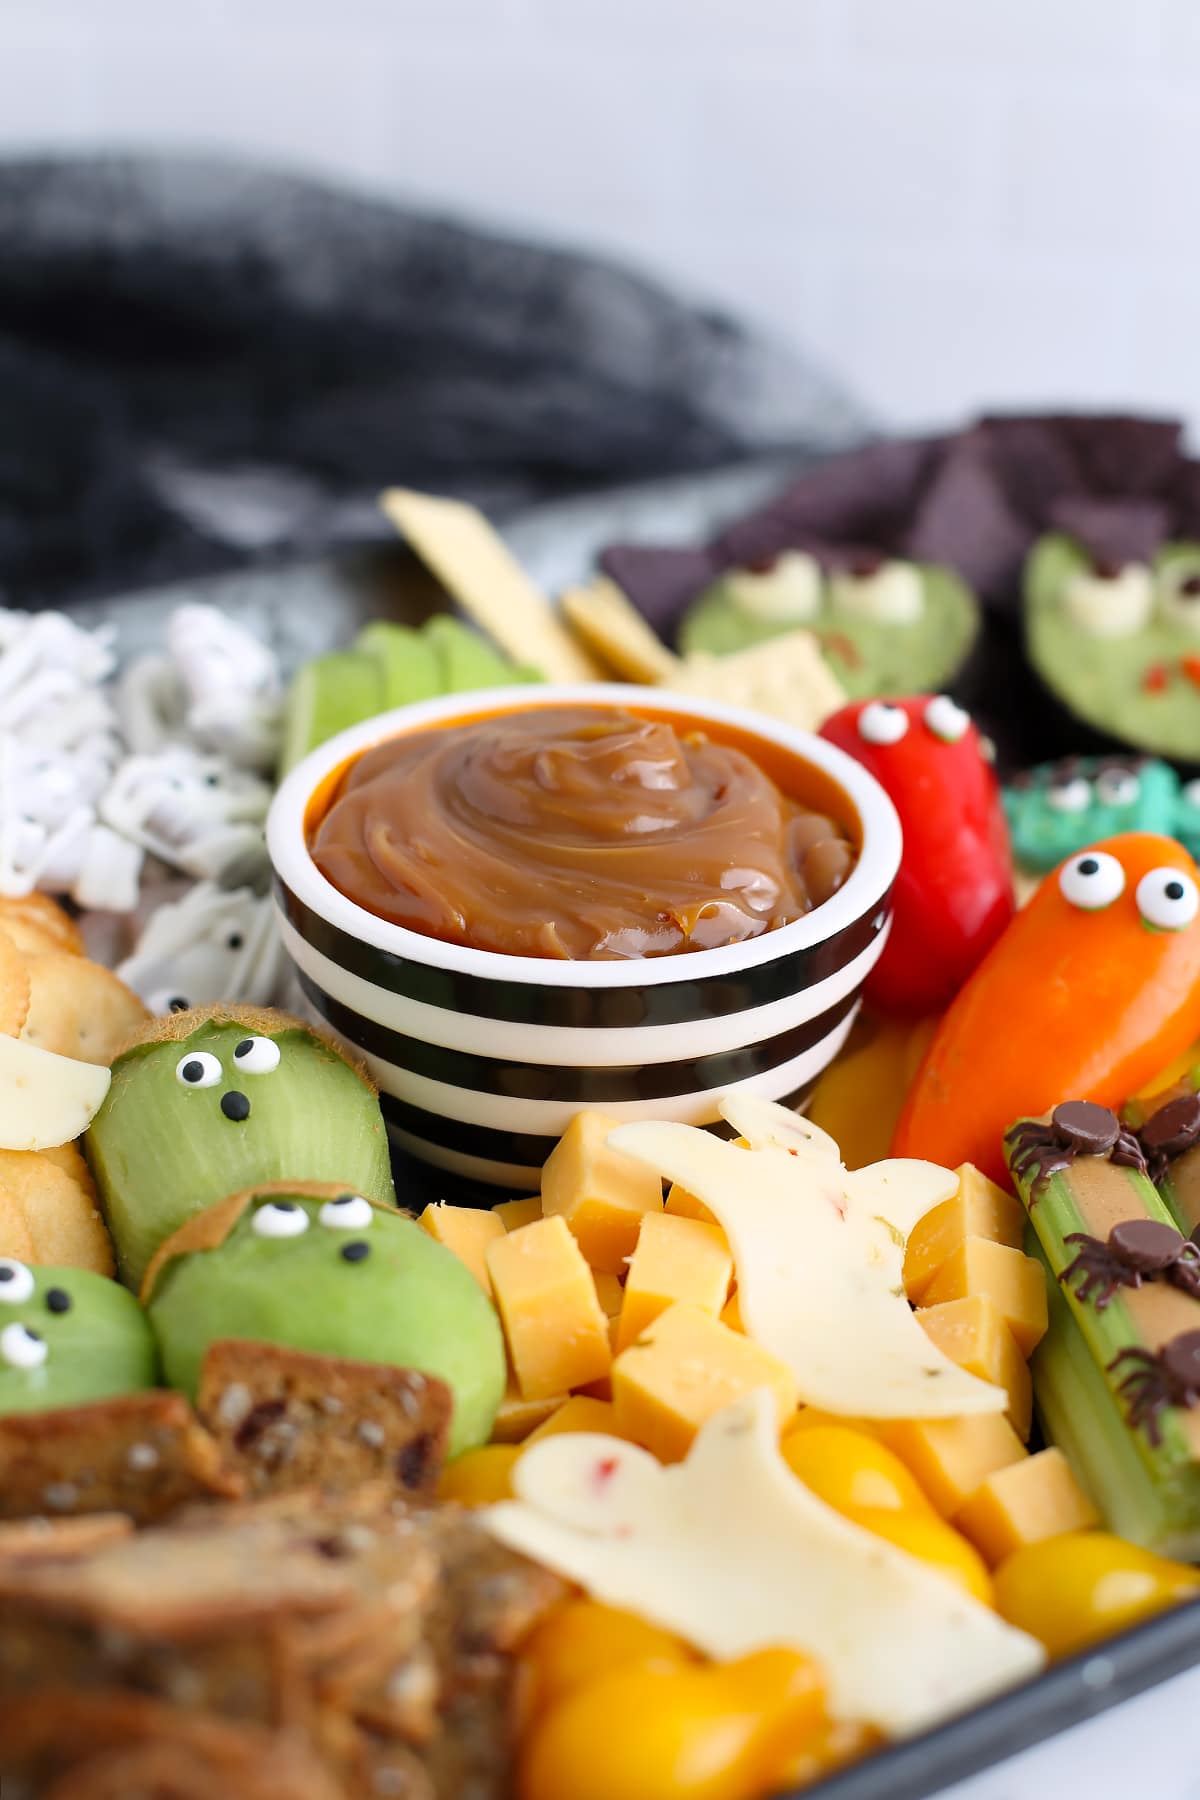 Caramel dip in a small striped bowl on a tray with cheese cubes, kiwi, chocolate covered pretzels, and assorted vegetables.